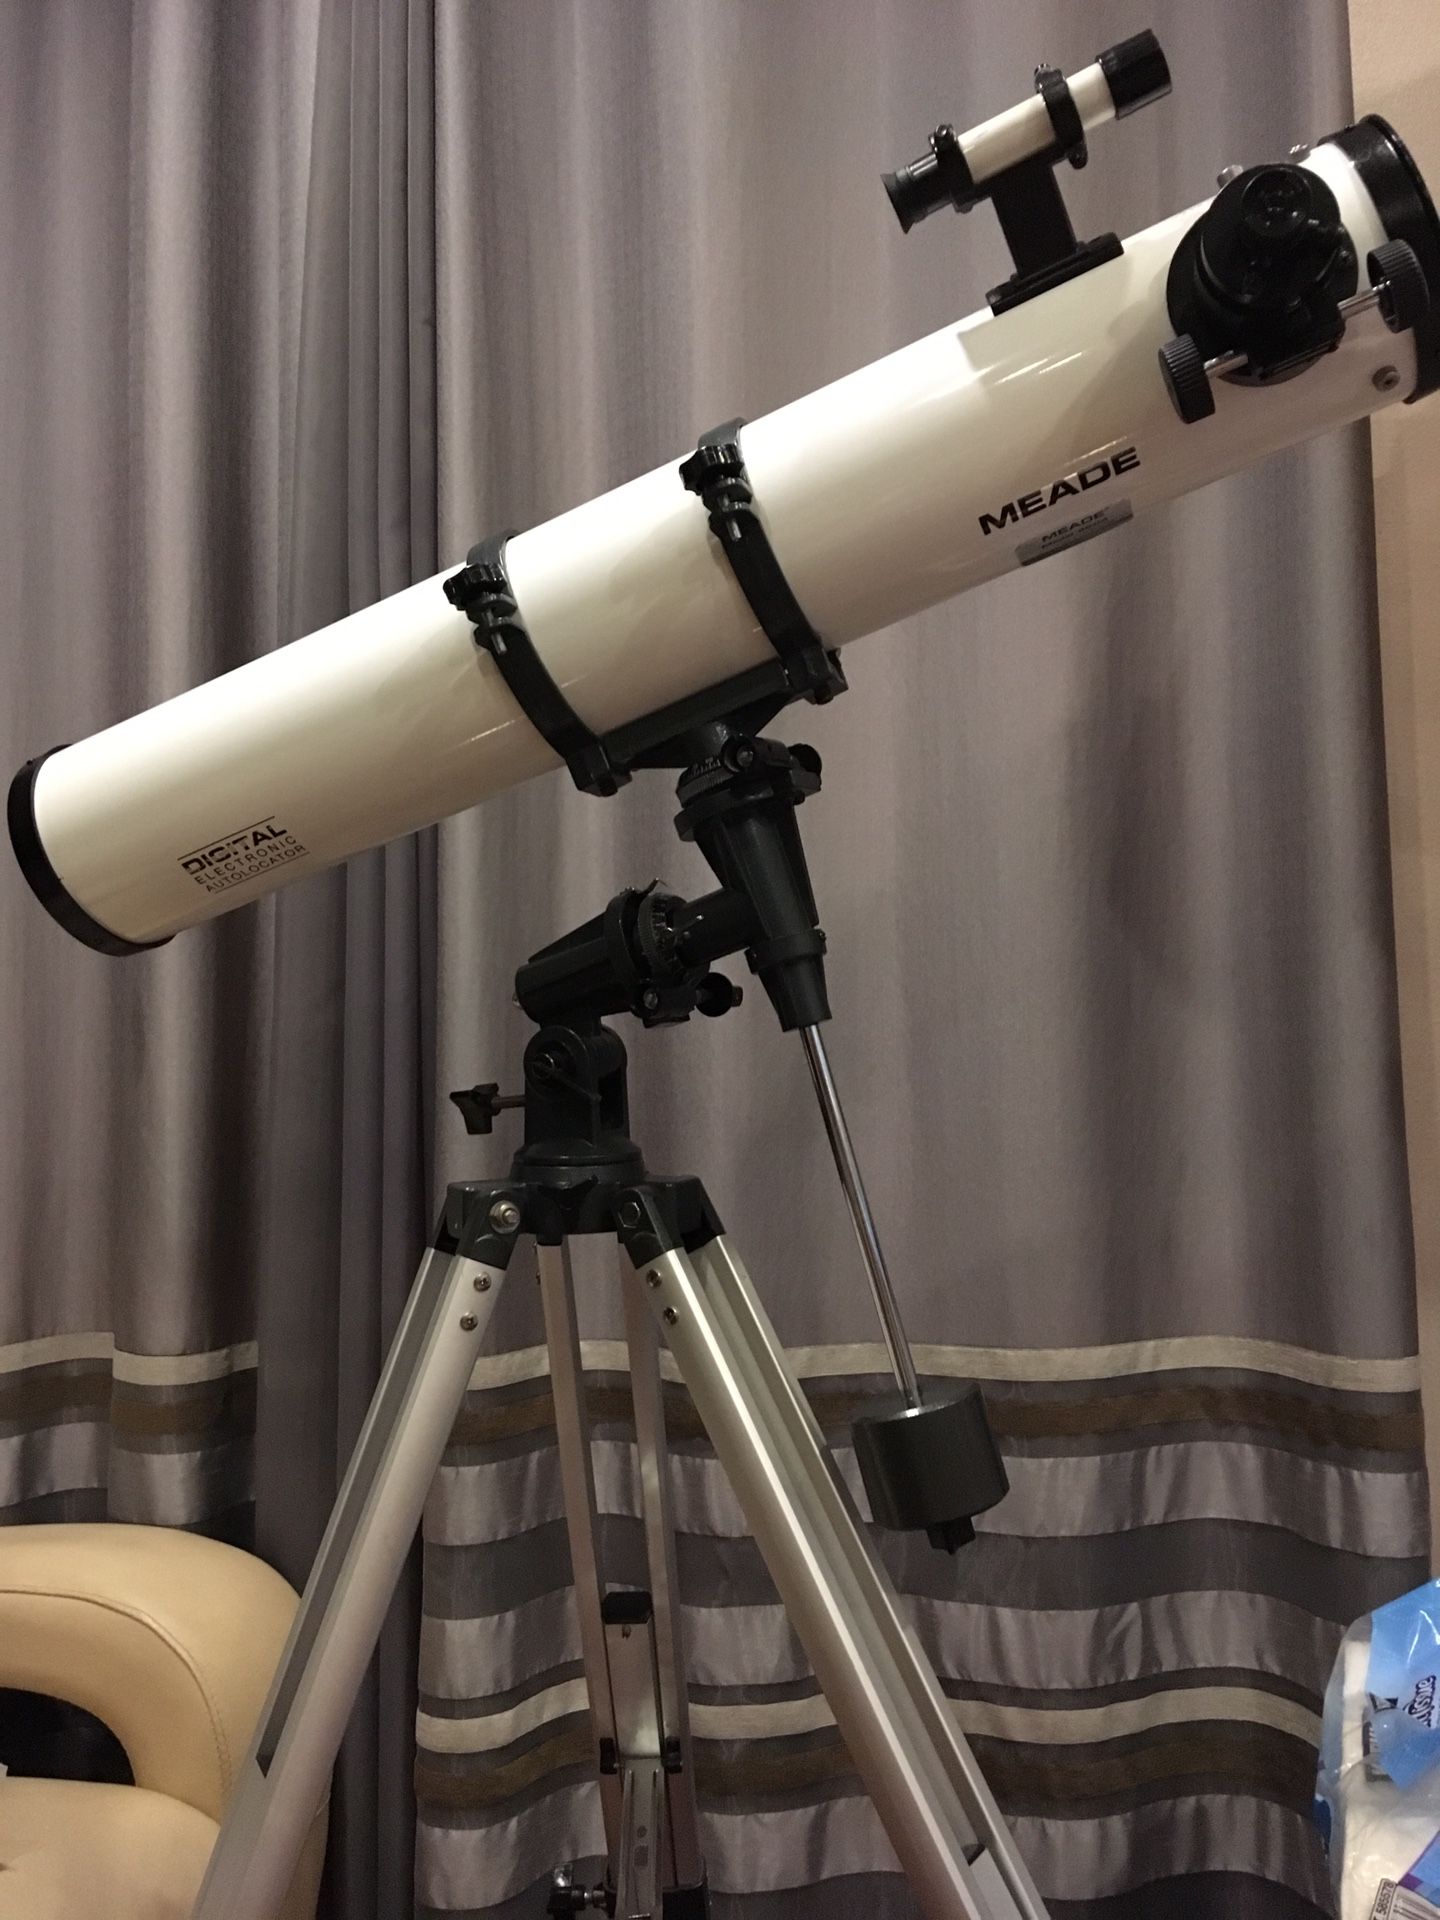 MEADE Professional Telescope 114x910 with Electronic Controller, 3 Eyepieces Lenses and Barlow Lens